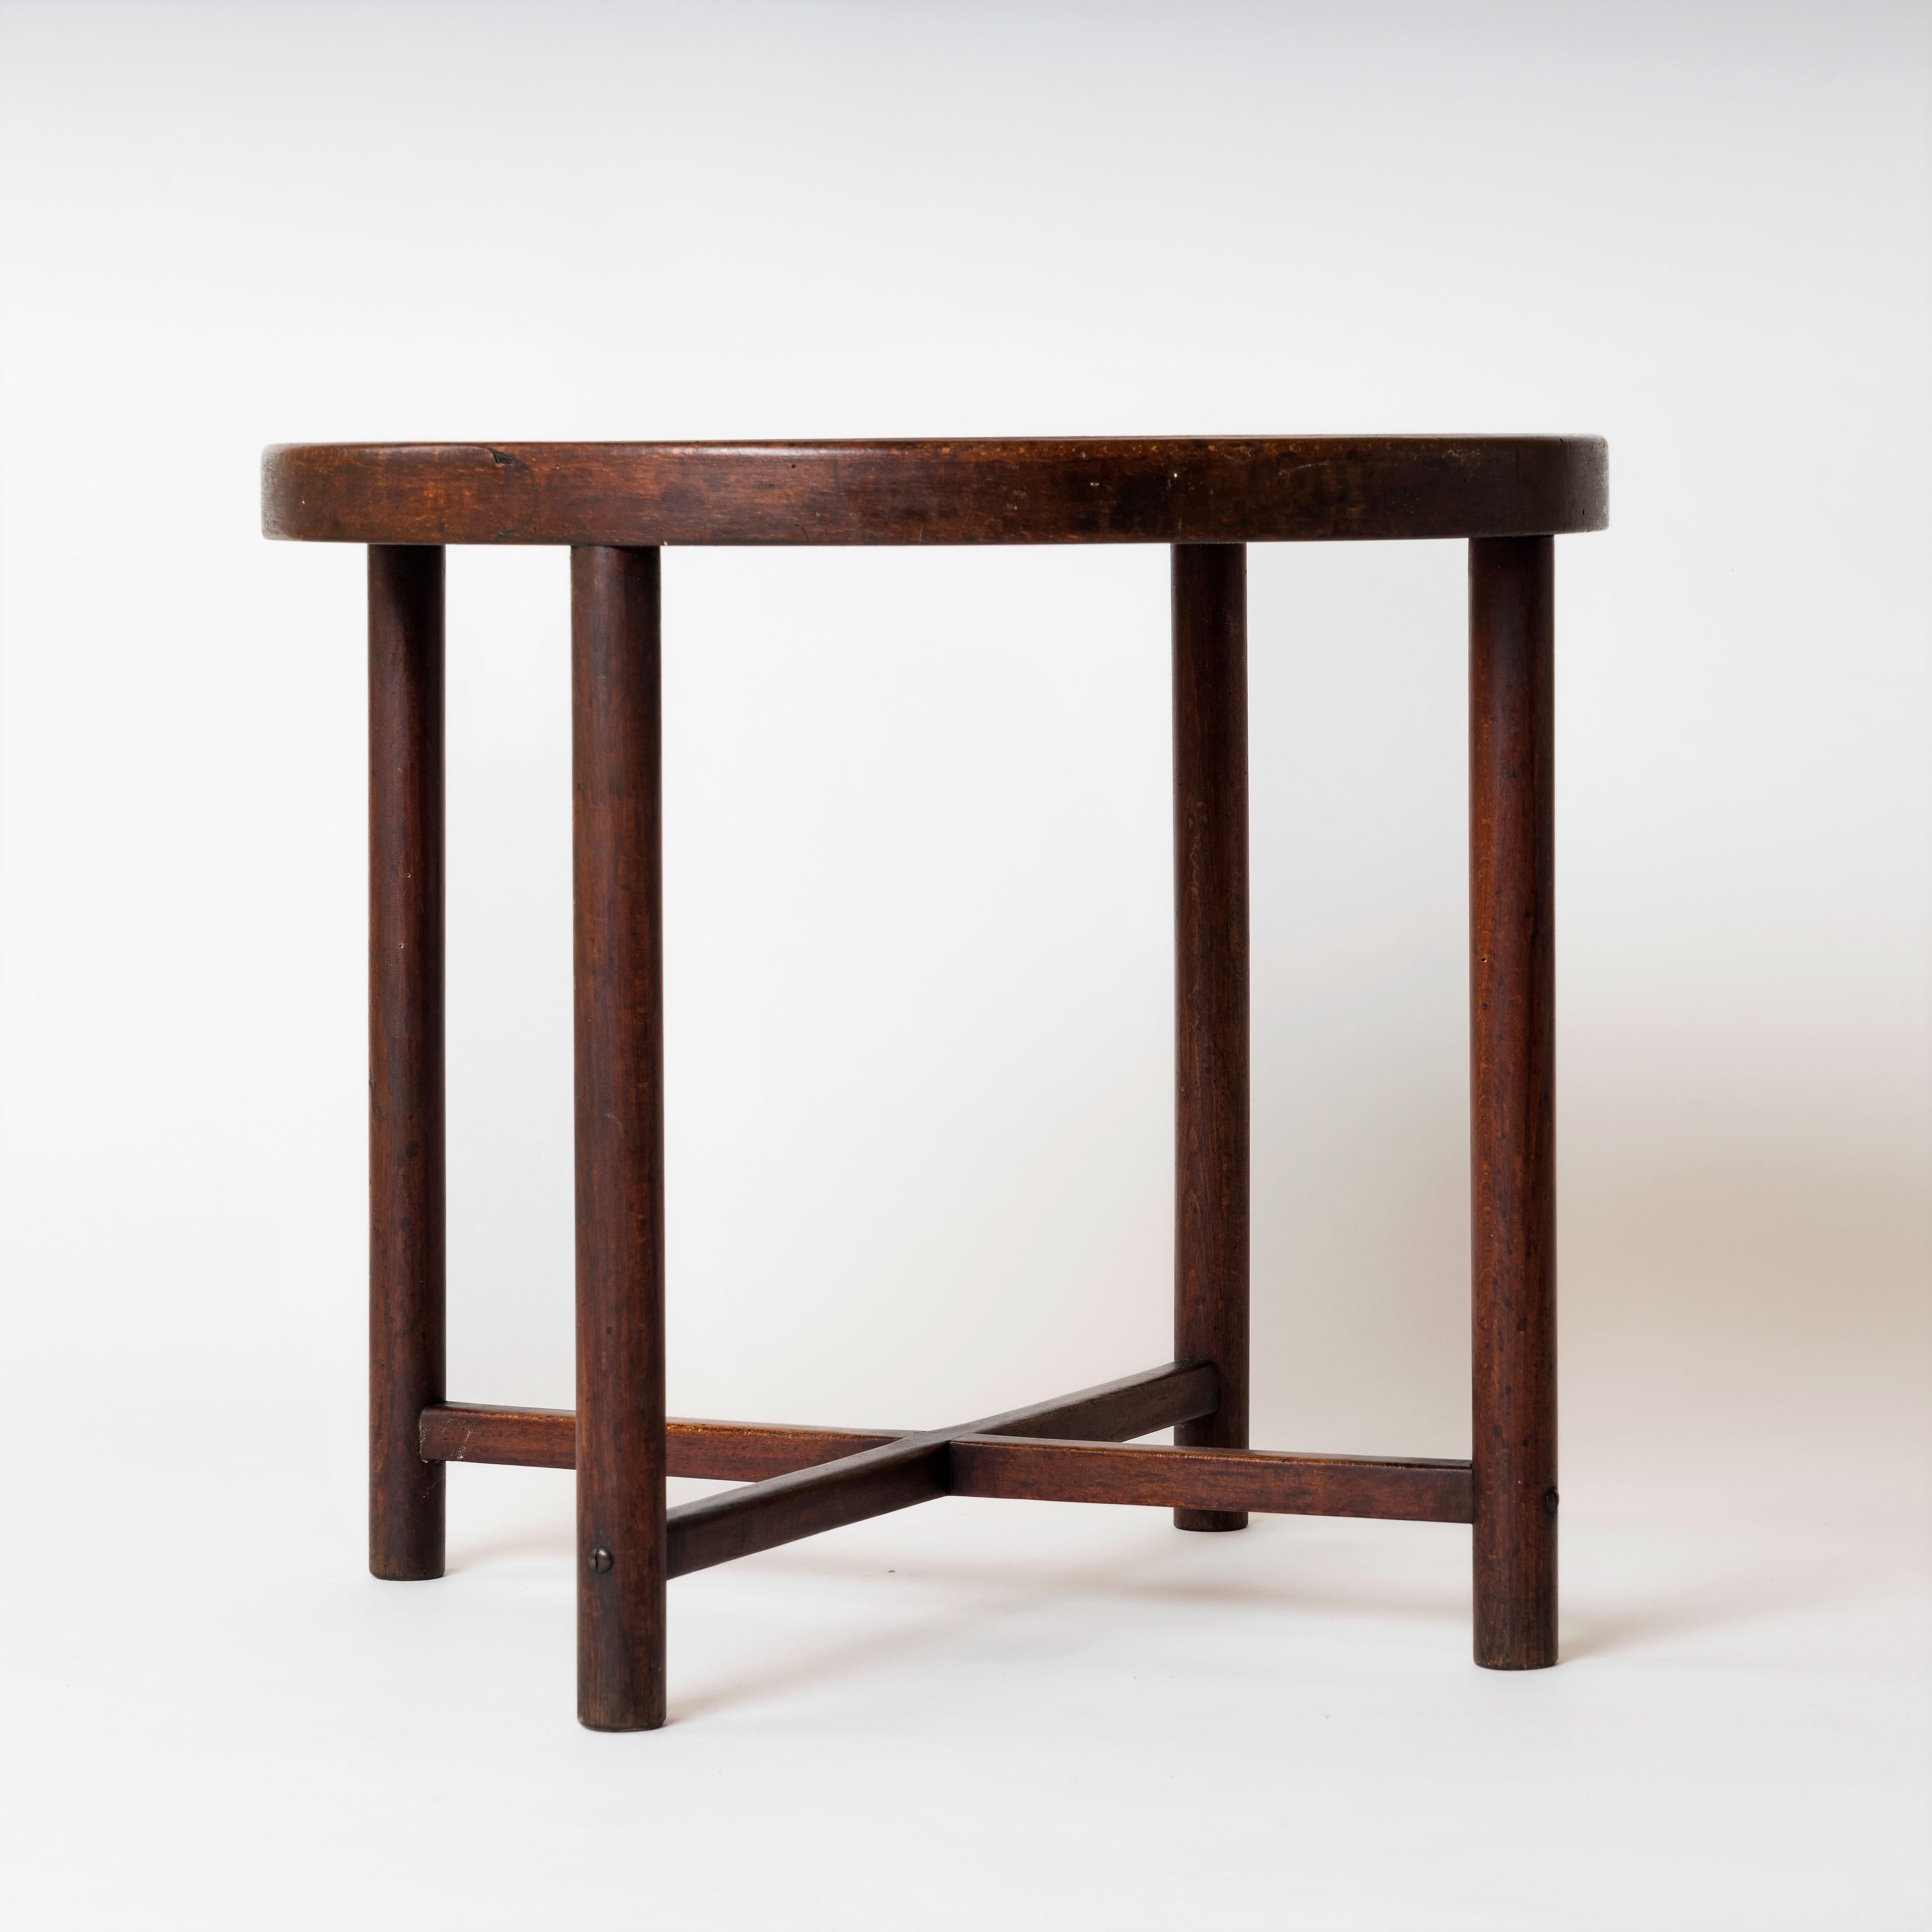 Austrian Signed Minimalist Tinted Oak Gueridon or Side Table by Thonet, Austria, 1920s